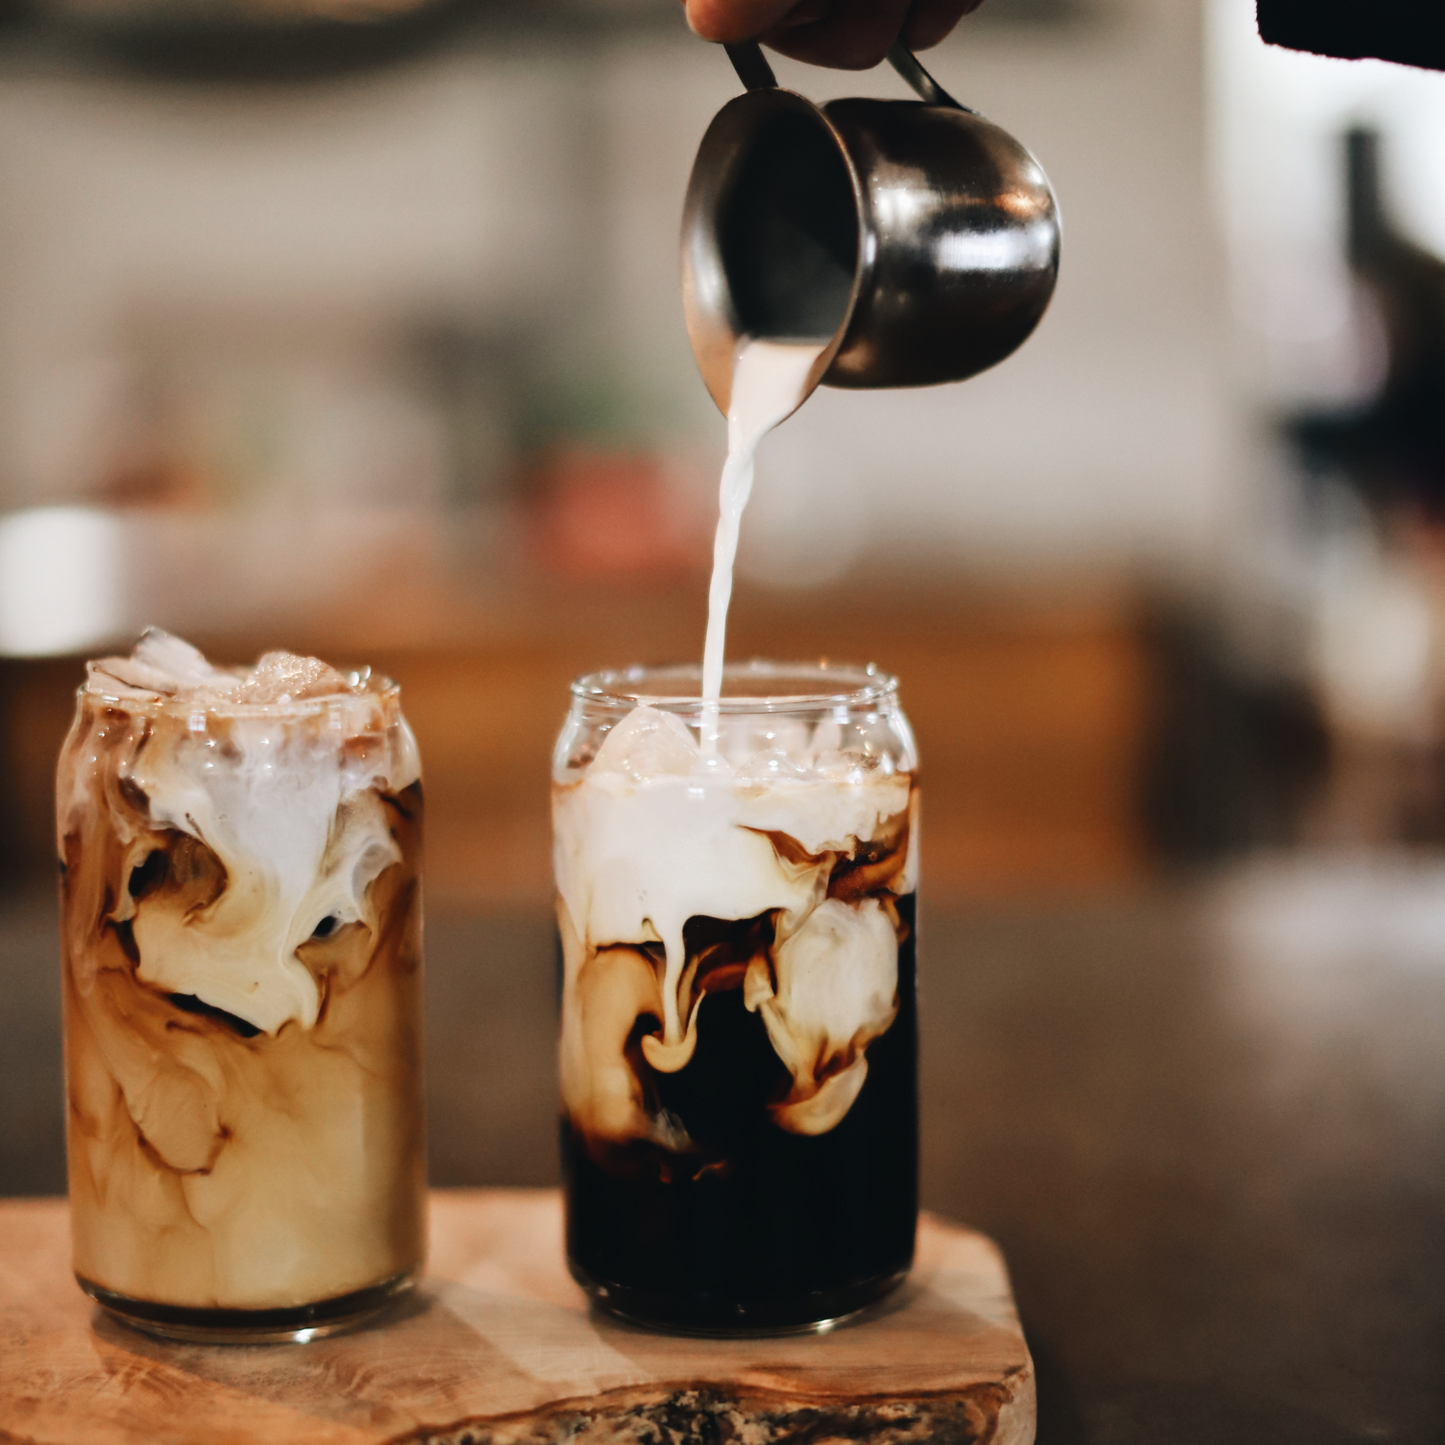 Cold Brew Coffee - Refreshing and Bold Flavor, Perfect for Any Occasion